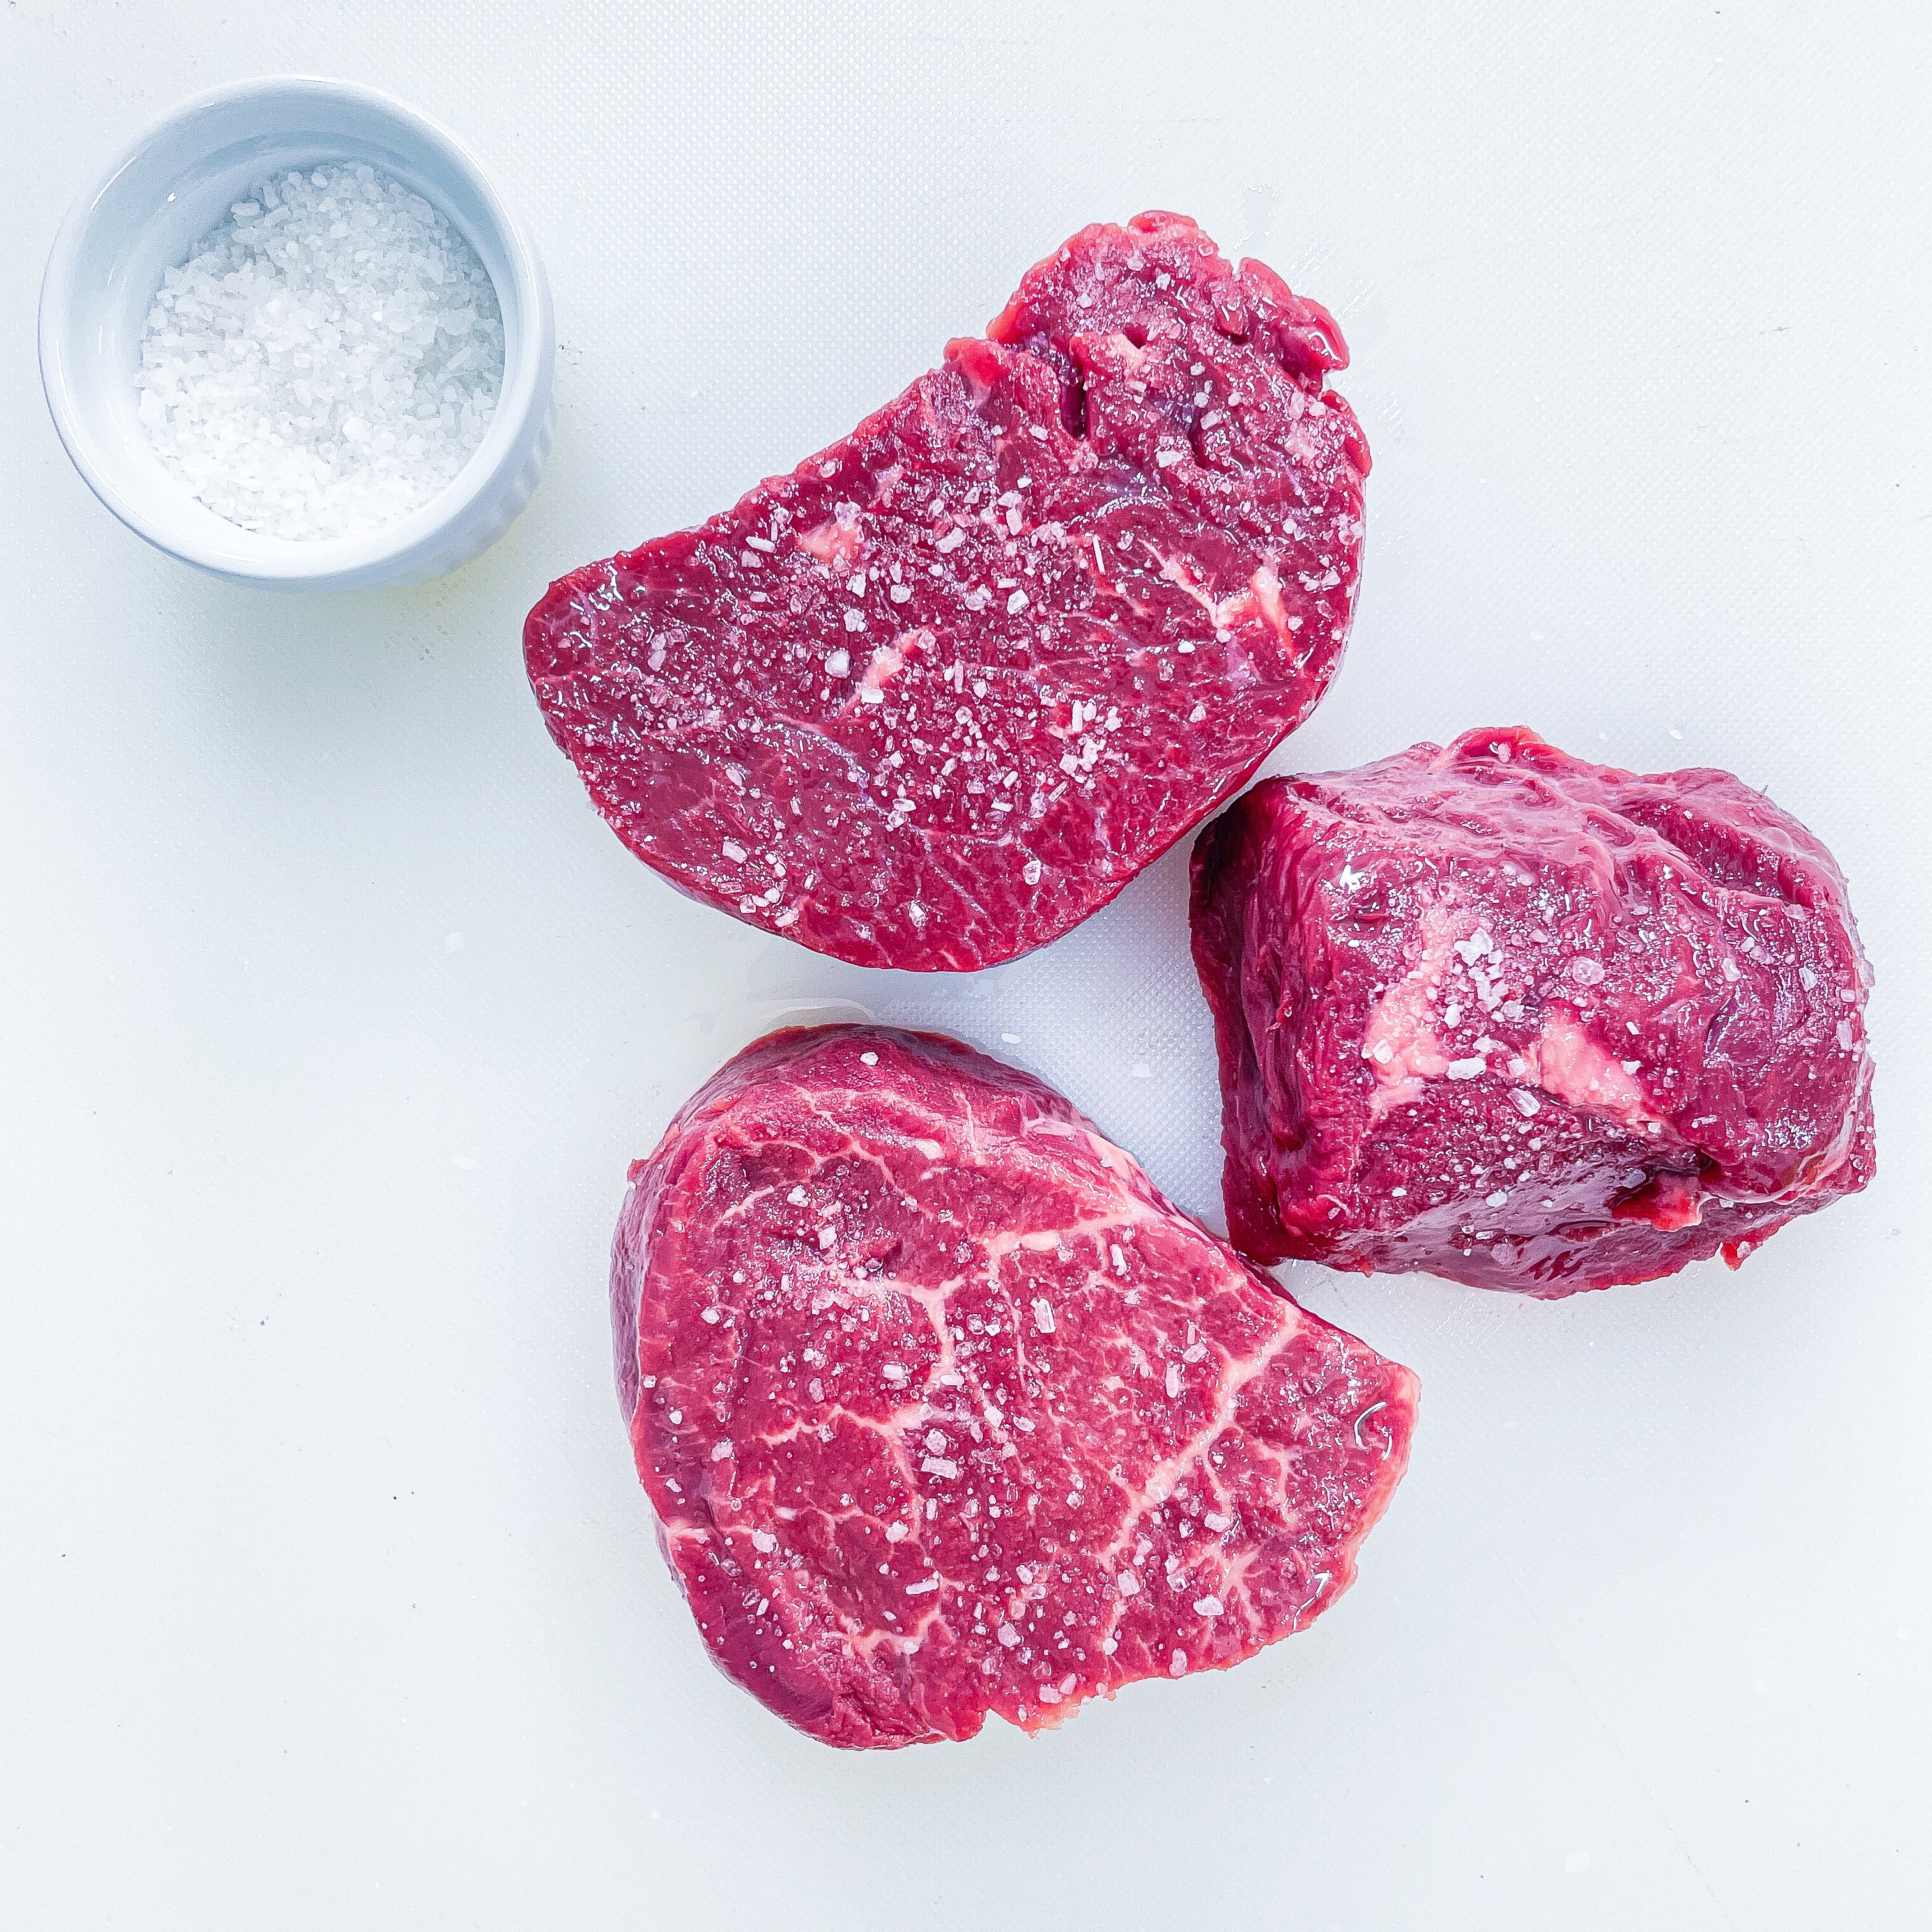 The Best Meat Tenderizers You Can Buy Online